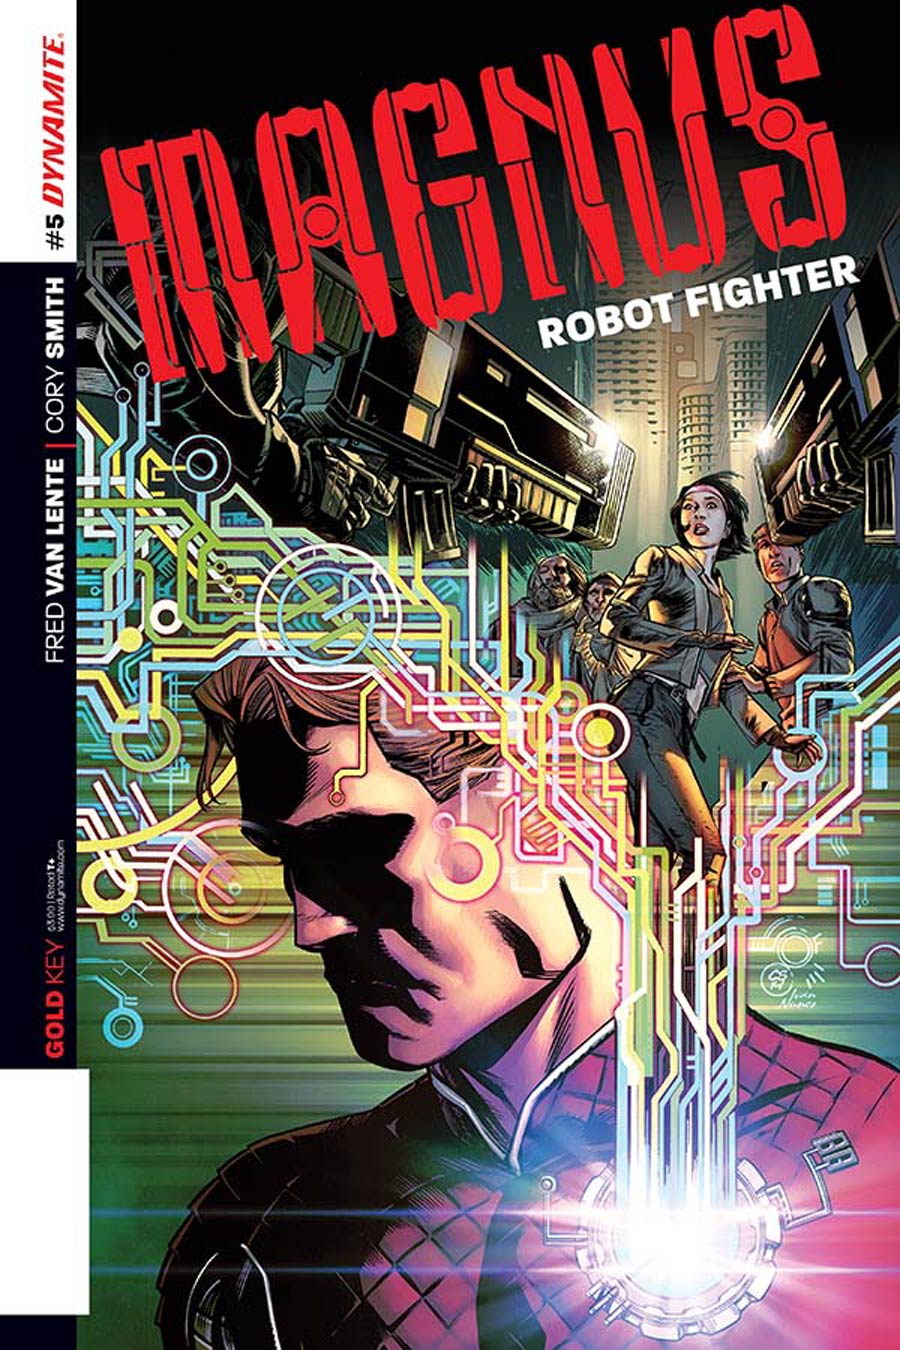 Magnus Robot Fighter Vol 4 #5 Cover B Variant Cory Smith Subscription Cover